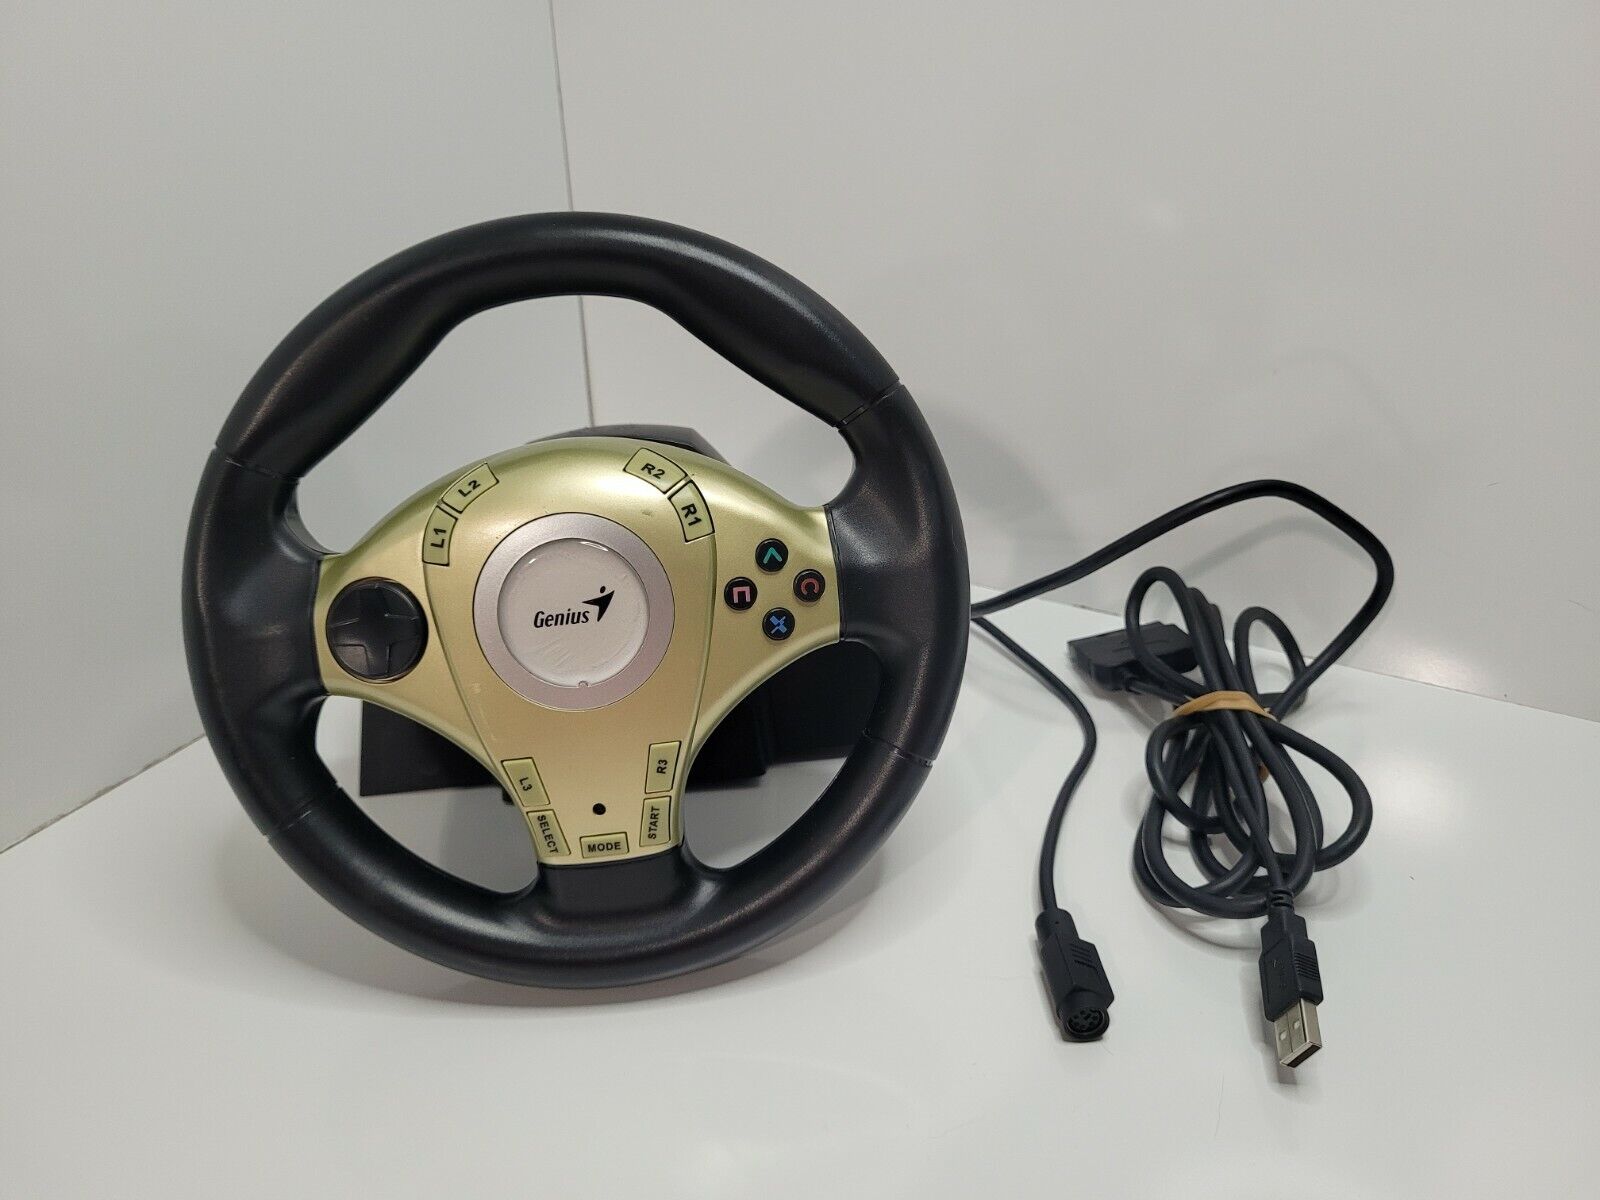 How To Fix Genius Twinwheel F1 Vibration Feedback F1 Racing Wheel For PS2 And PC